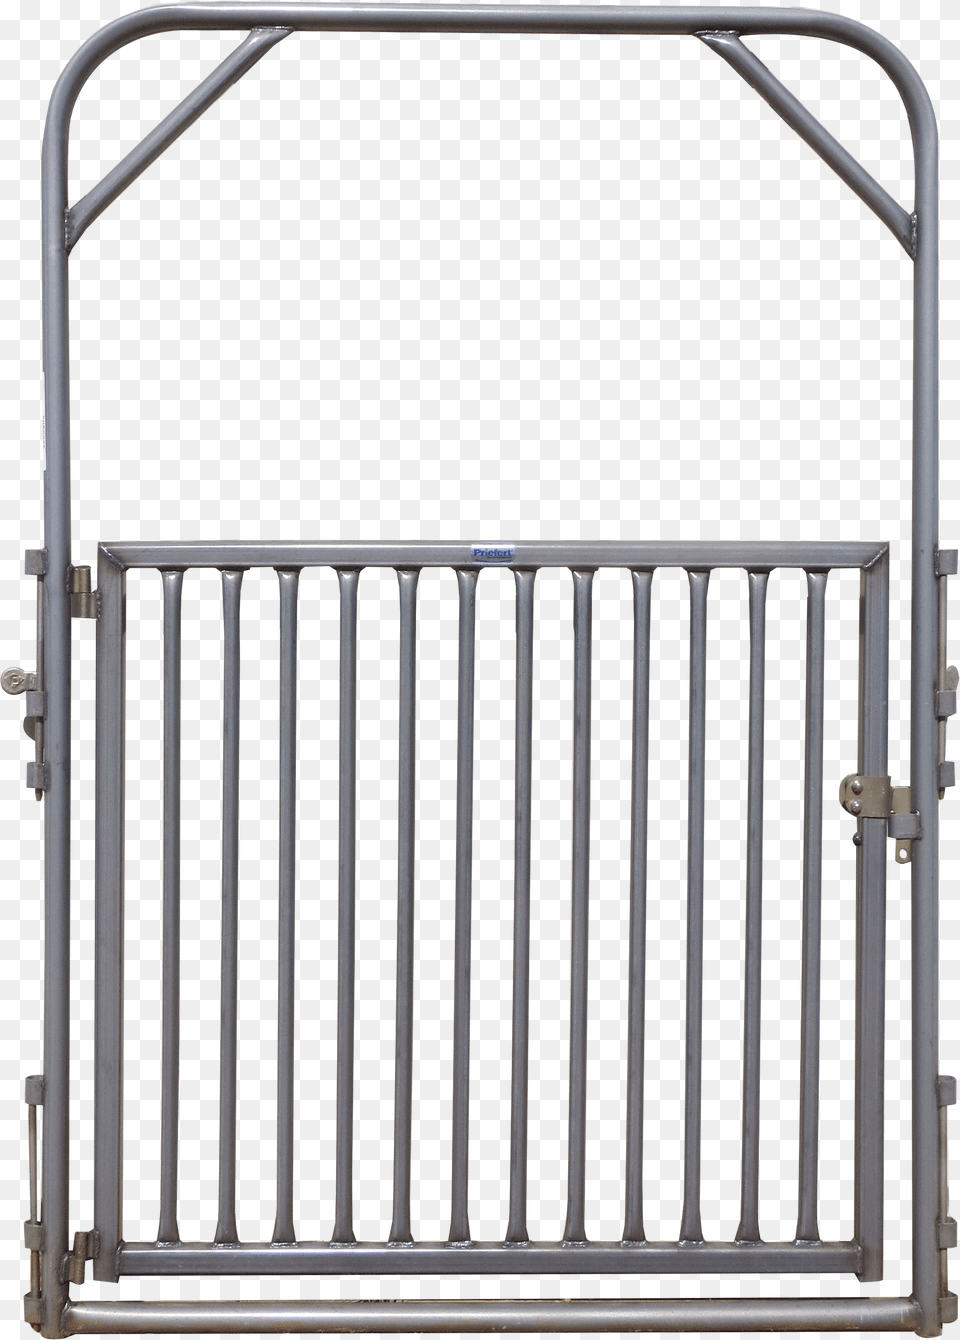 Add To Quote Sheep, Fence, Gate, Handrail, Railing Png